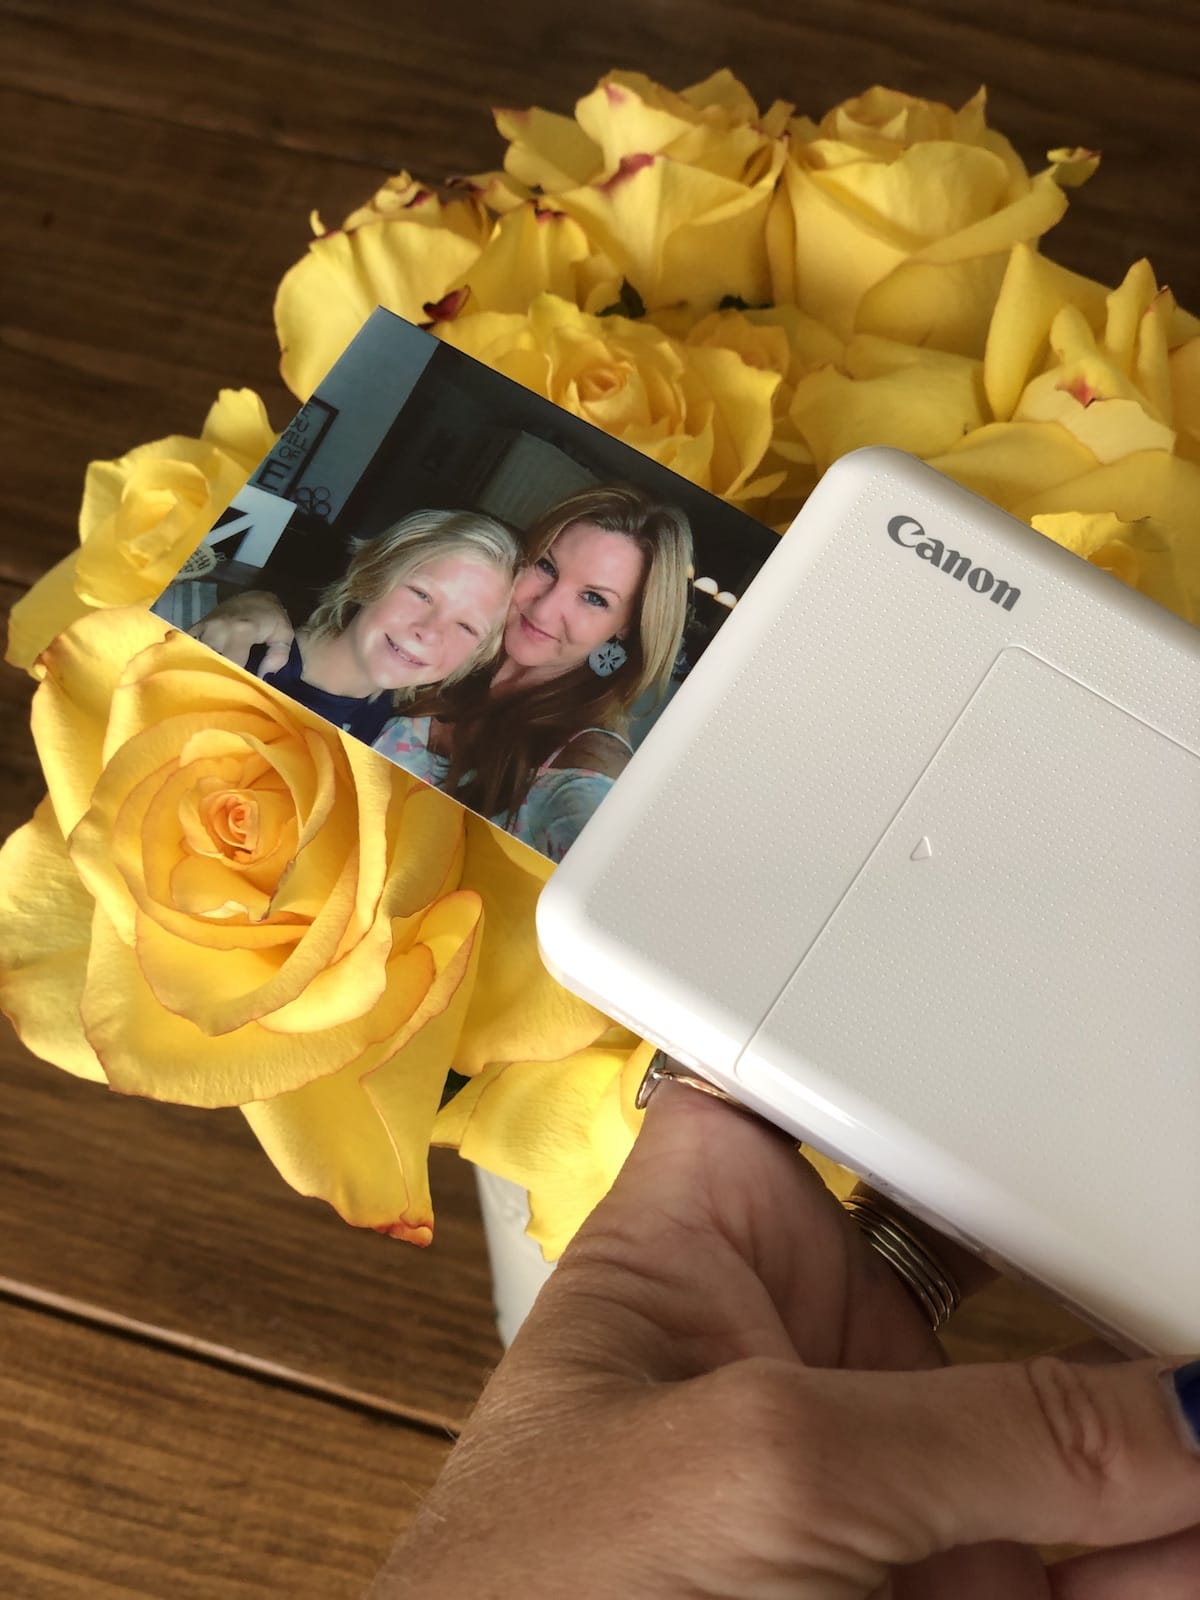 Photo Lovers Rejoice -Canon IVY CLIQ & CLIQ+ Instant Print Cameras With Mini Printers From Best Buy